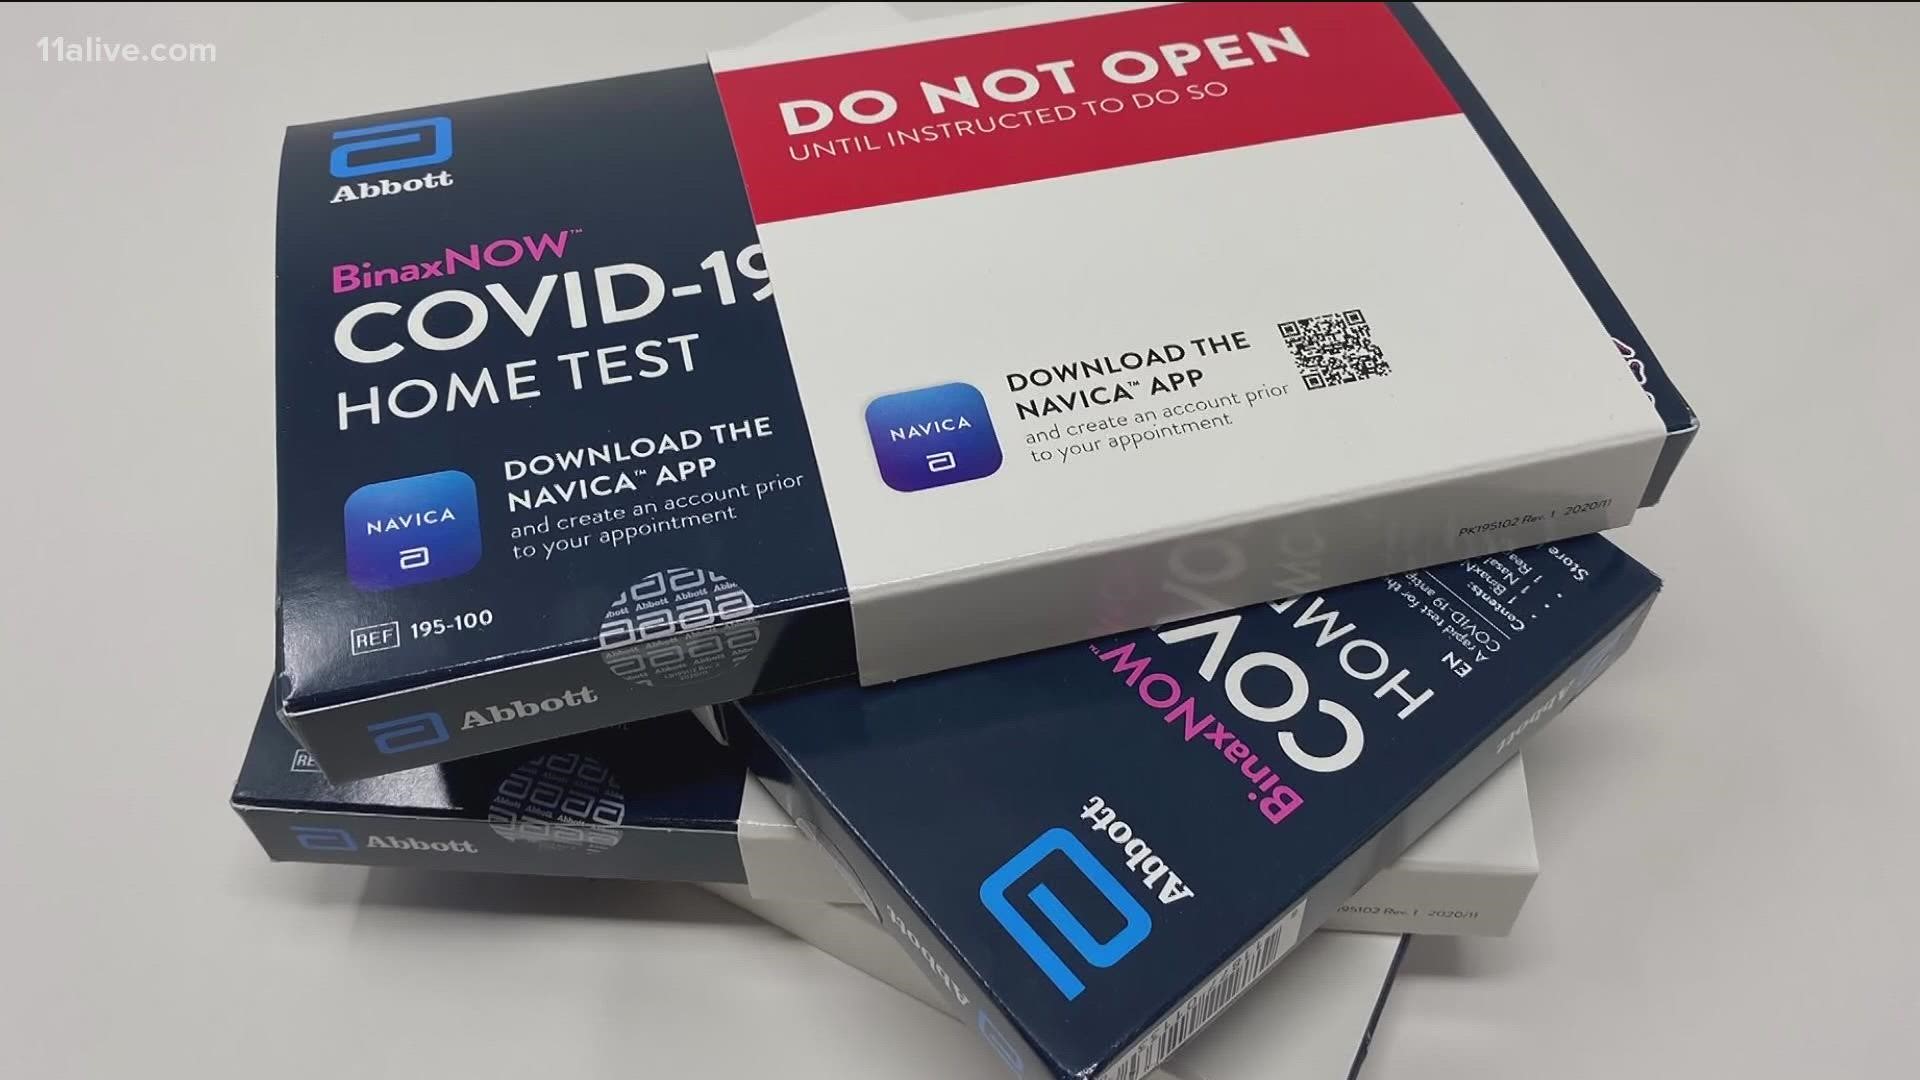 FDA recommends getting molecular tests done.